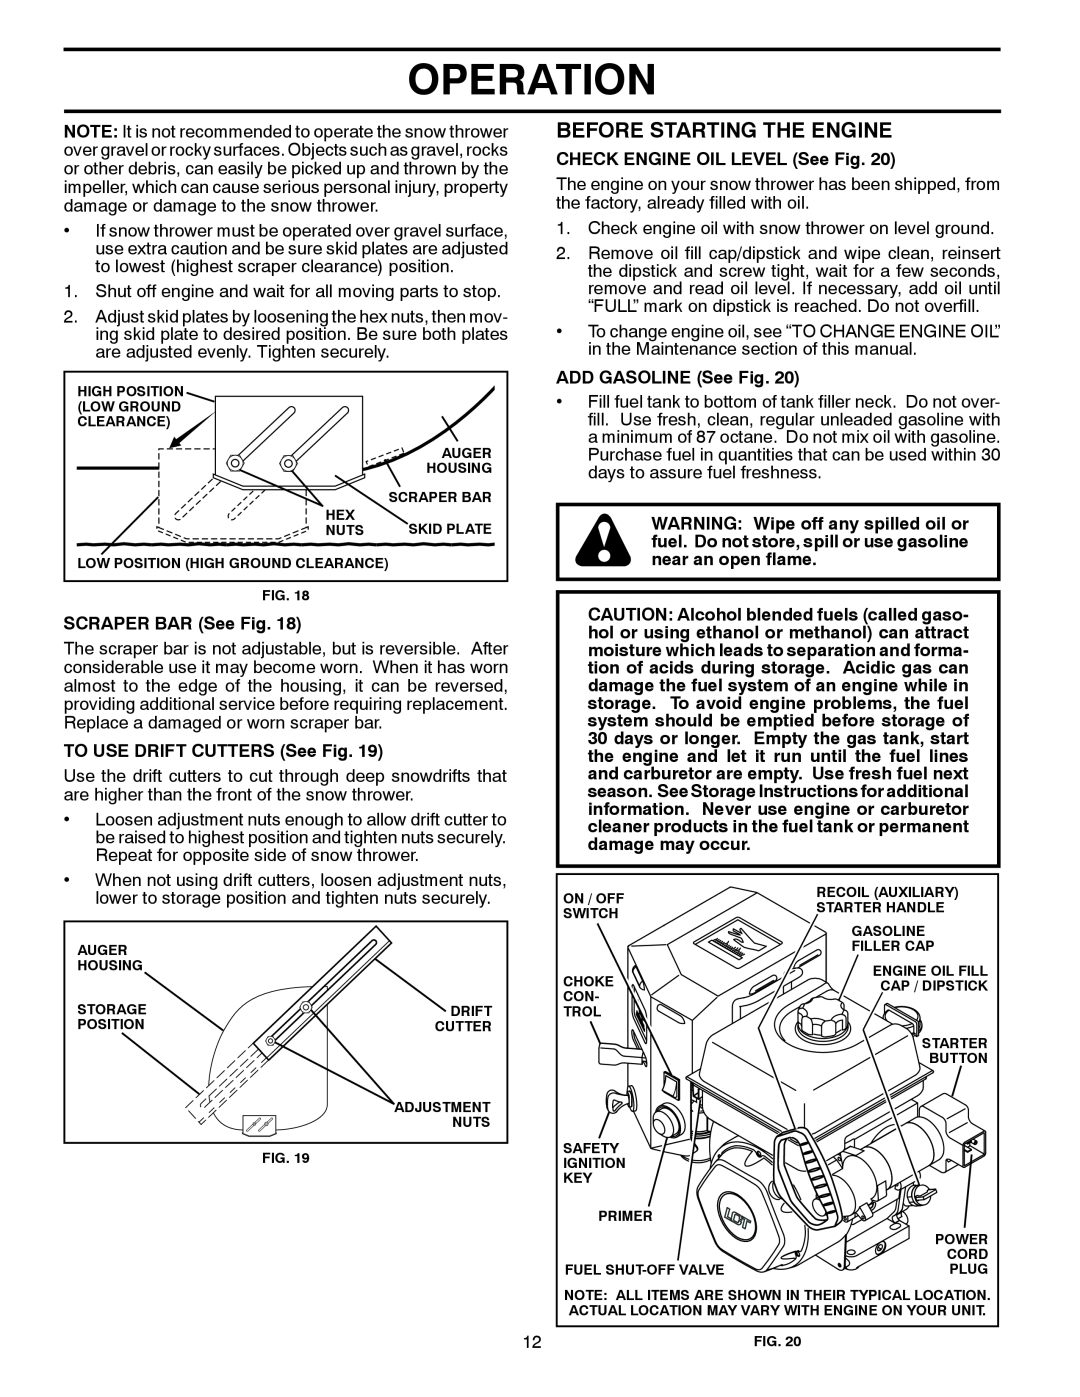 Poulan 429896, 96192003201 Before Starting The Engine, Operation, SCRAPER BAR See Fig, TO USE DRIFT CUTTERS See Fig 